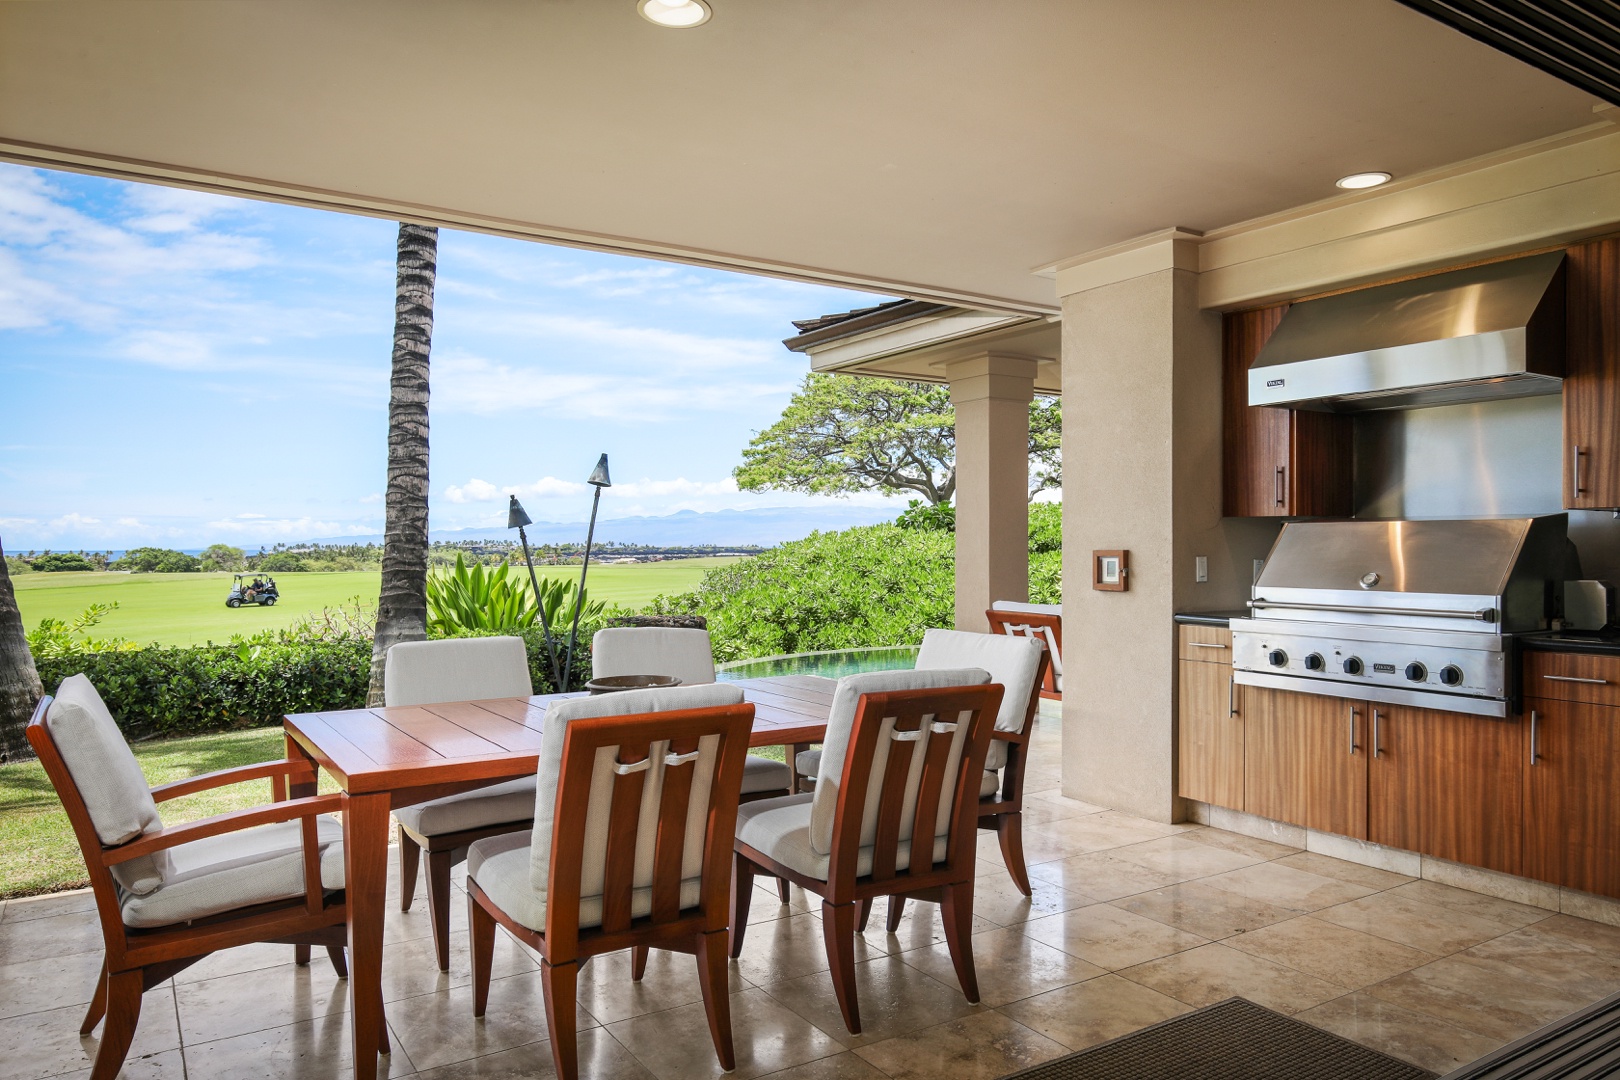 Kailua Kona Vacation Rentals, 4BD Pakui Street (147) Estate Home at Four Seasons Resort at Hualalai - View of exterior dining featuring the top tier built-in BBQ grill.